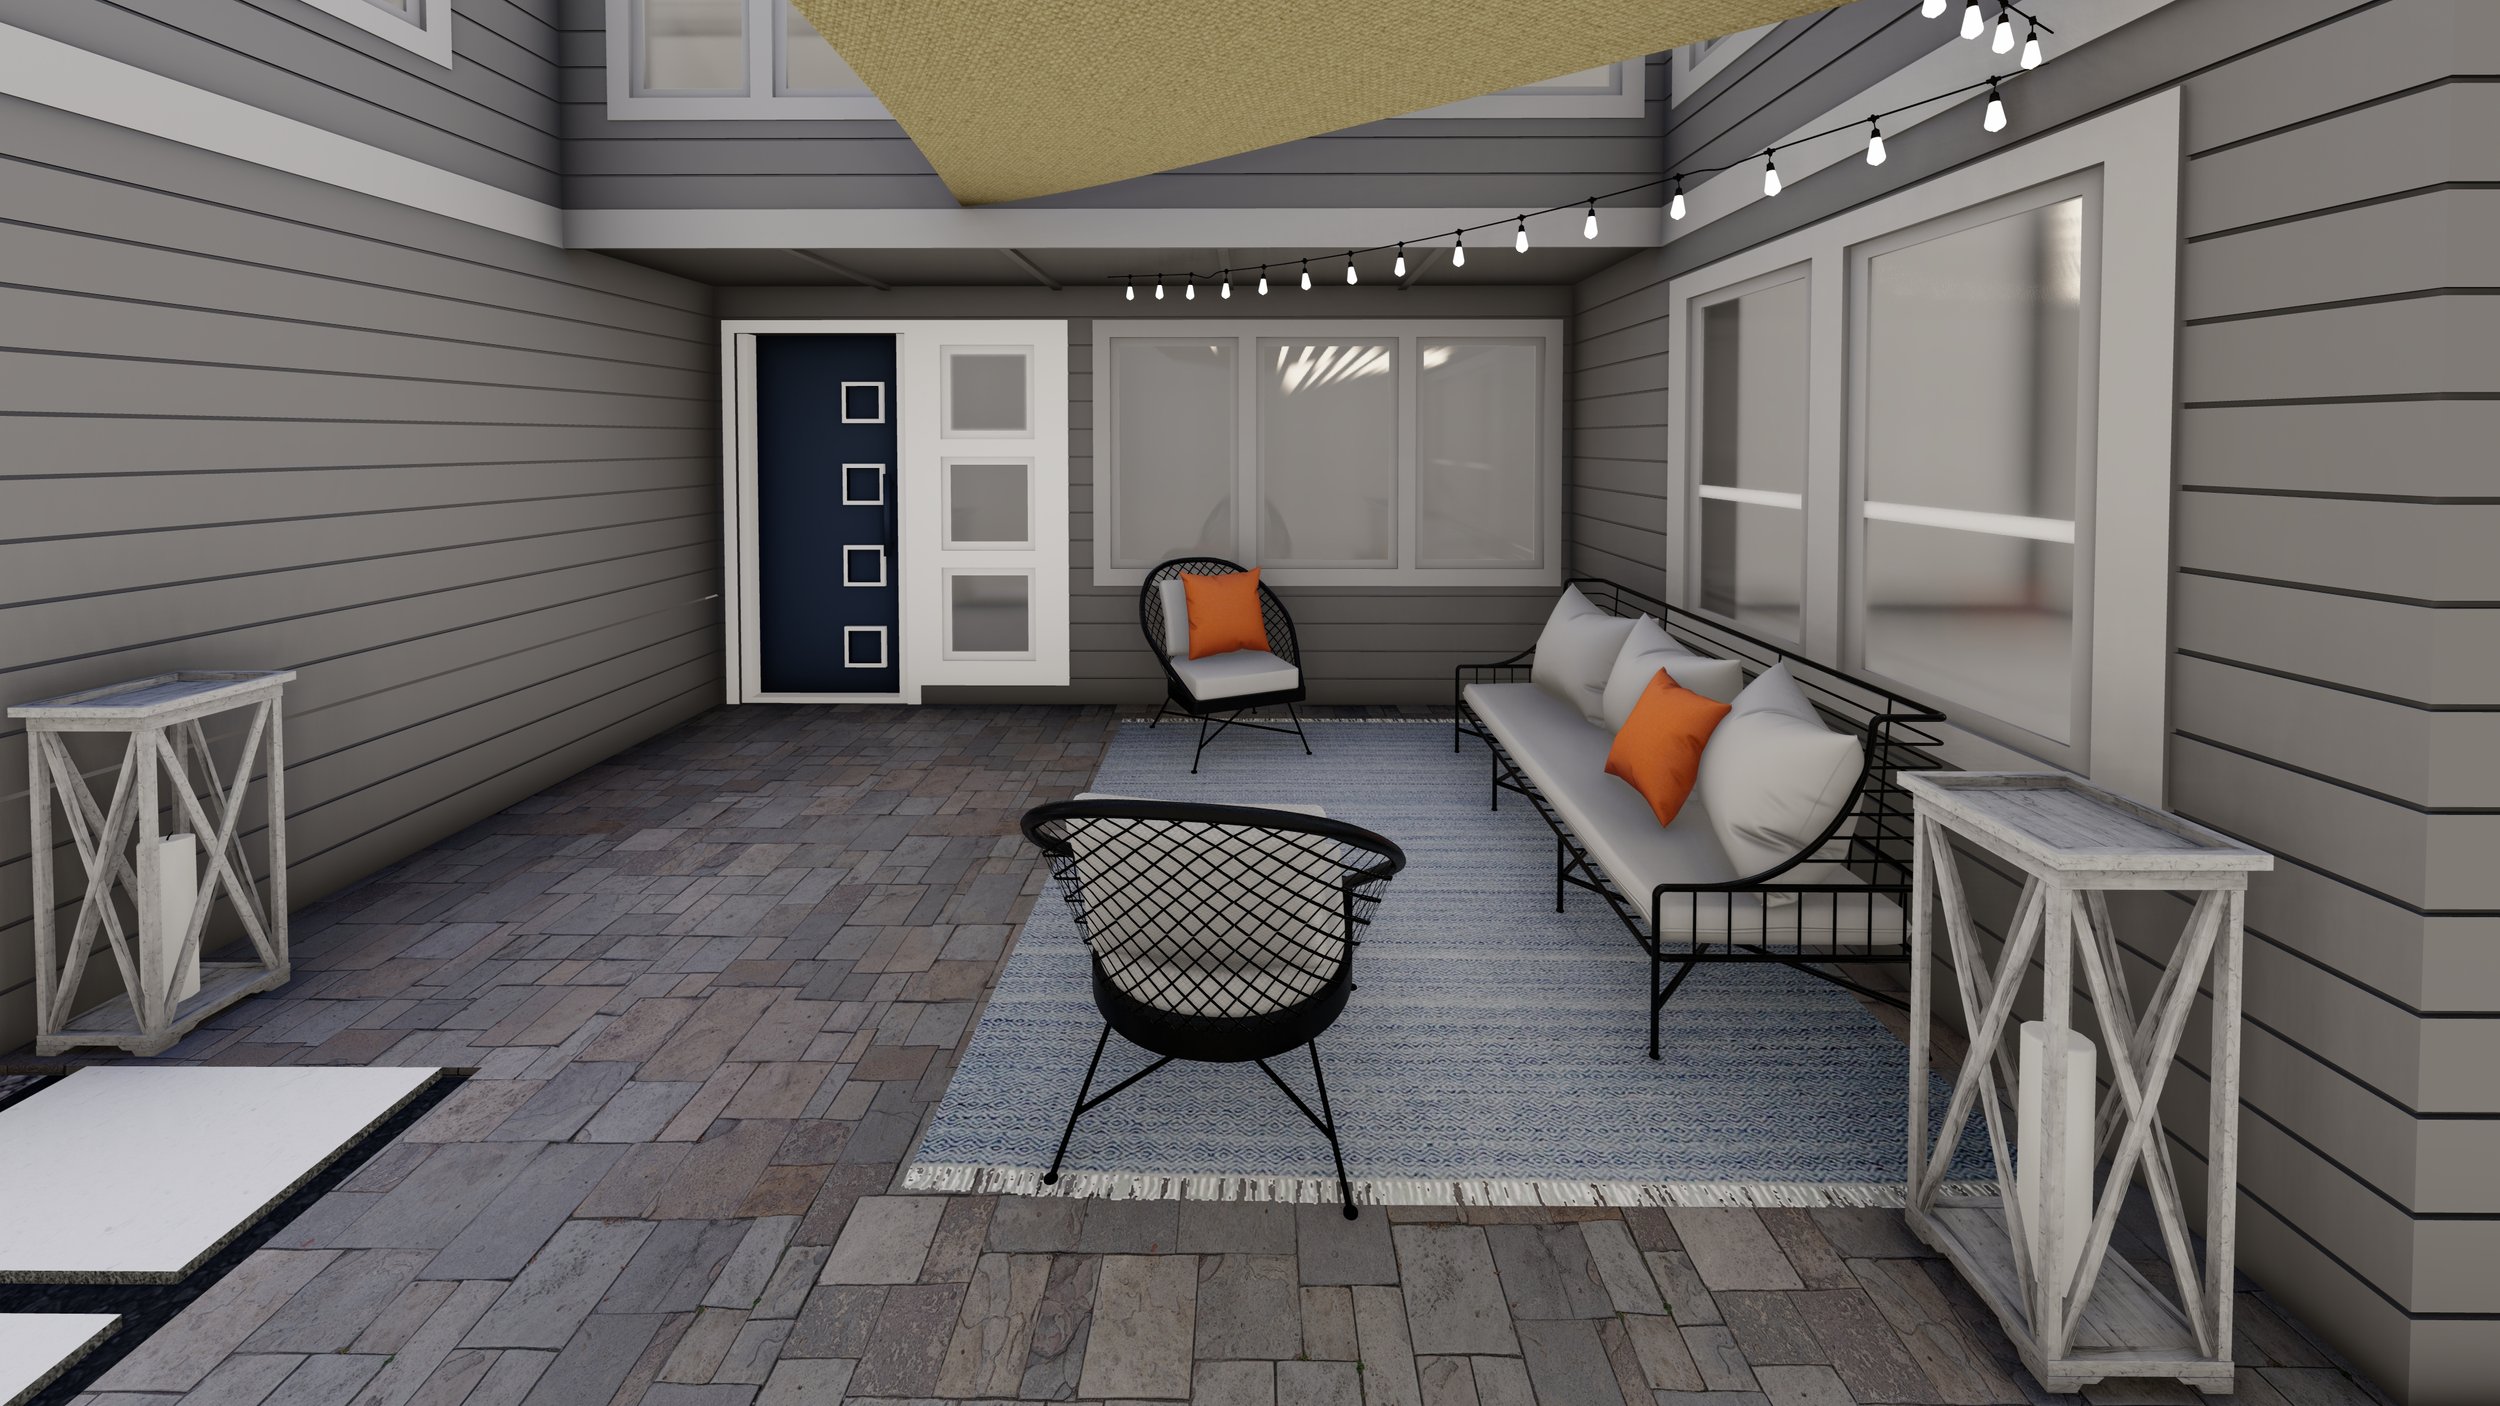 Paved courtyard and residential entrance with balck metal outdoor sofa and lounge chairs.